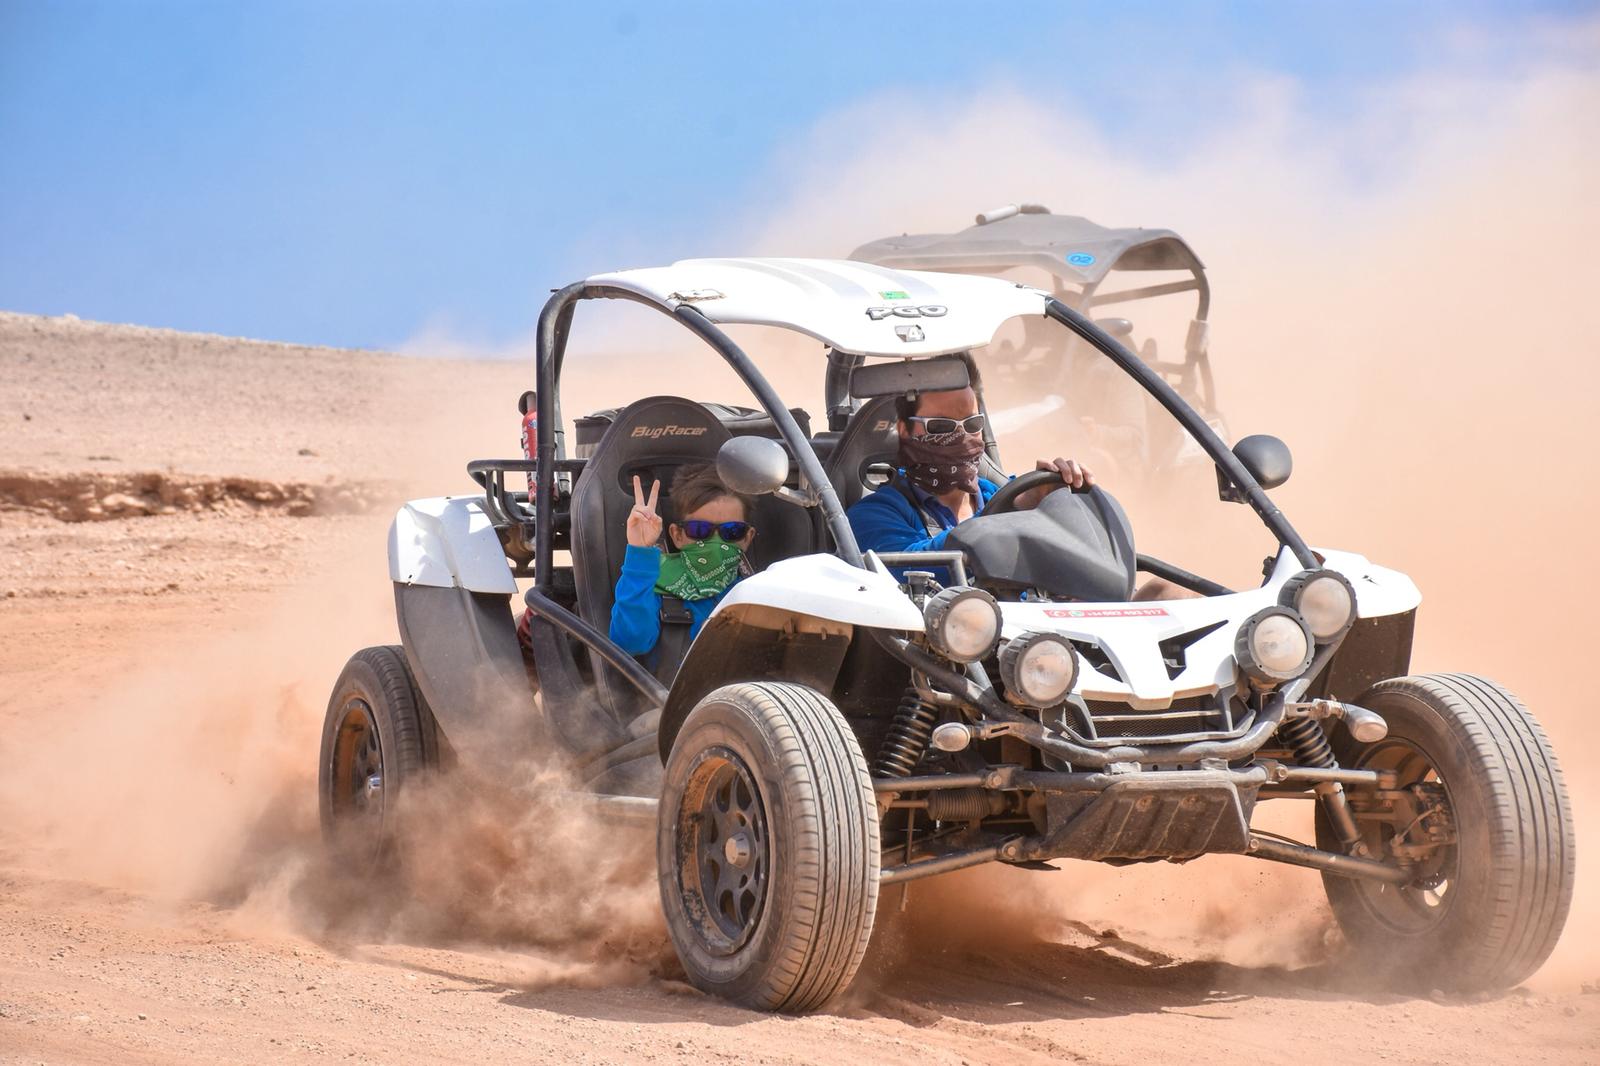 the buggy your hotel you will to the through the your buggy at the back to start your and a les desert ride tripadvisor will dunes guide berber hotel photos